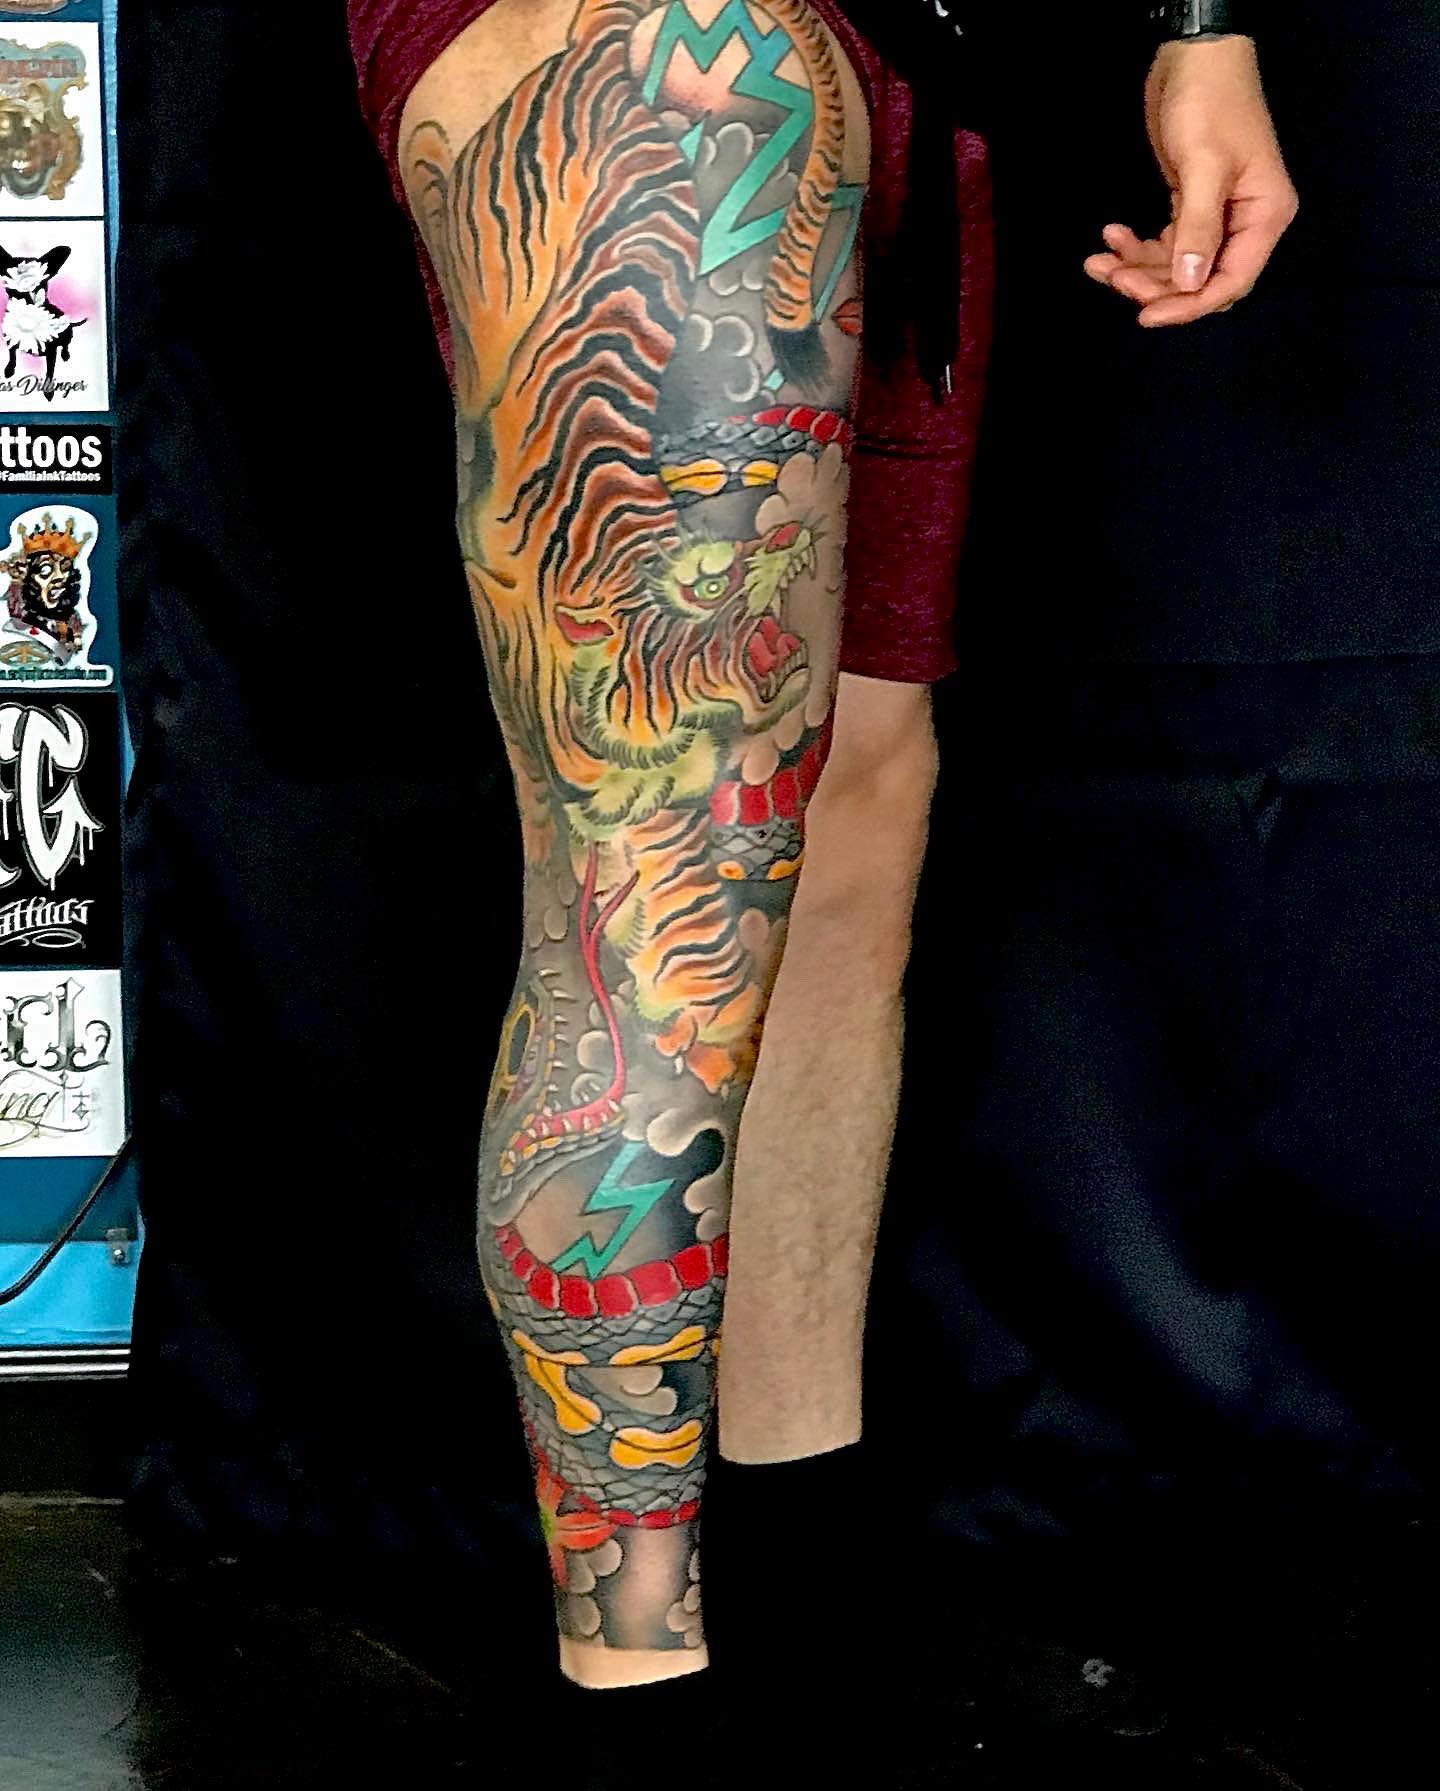 Tiger tattoo on the thigh